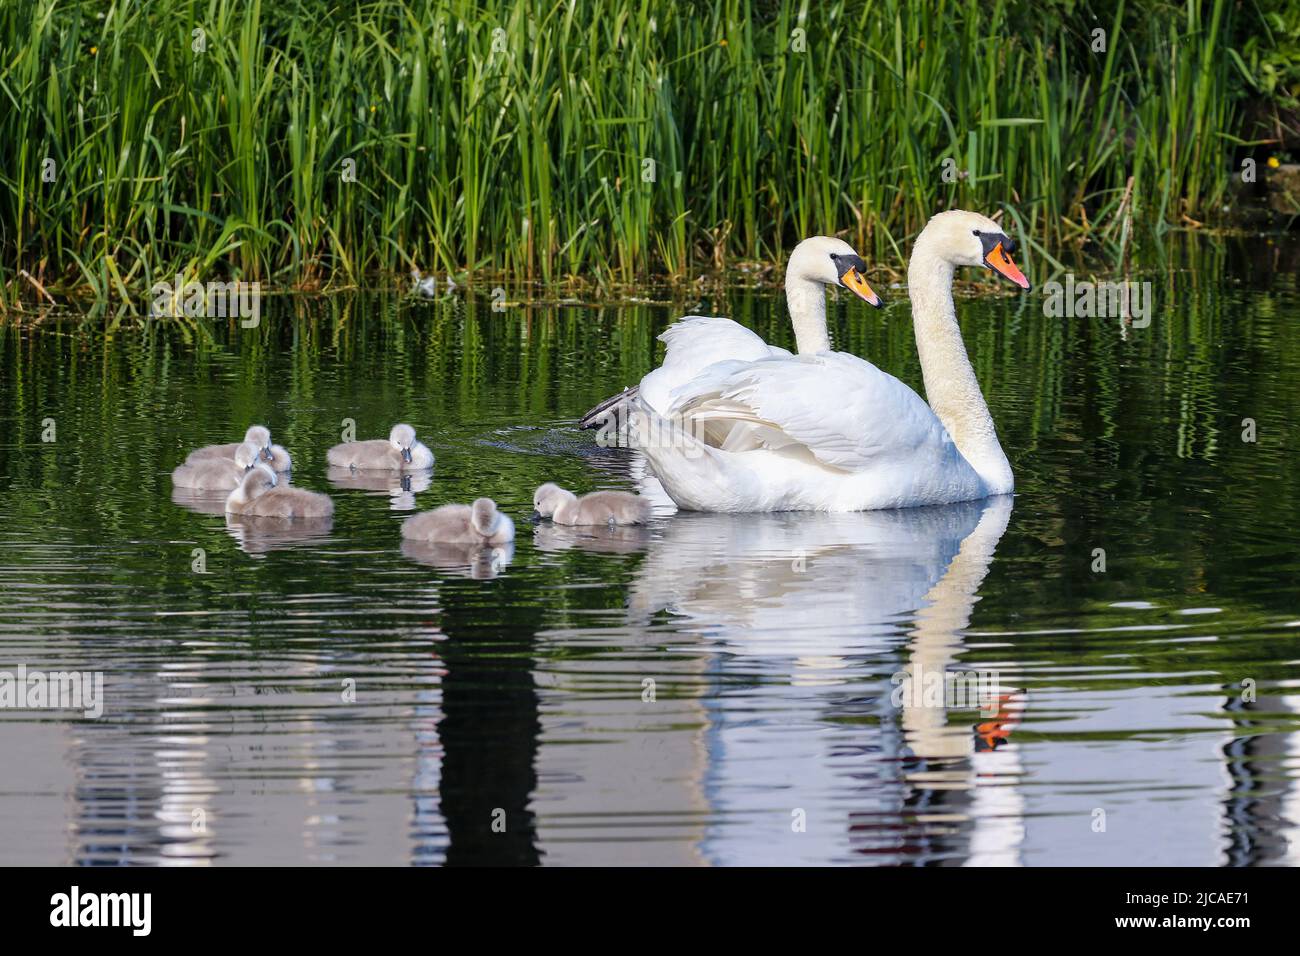 Swan parents with cygnets swimming in water. Cute baby swans with cob and pen 'Cygnus olor'. Water reflection. Grand Canal, Dublin, Ireland Stock Photo